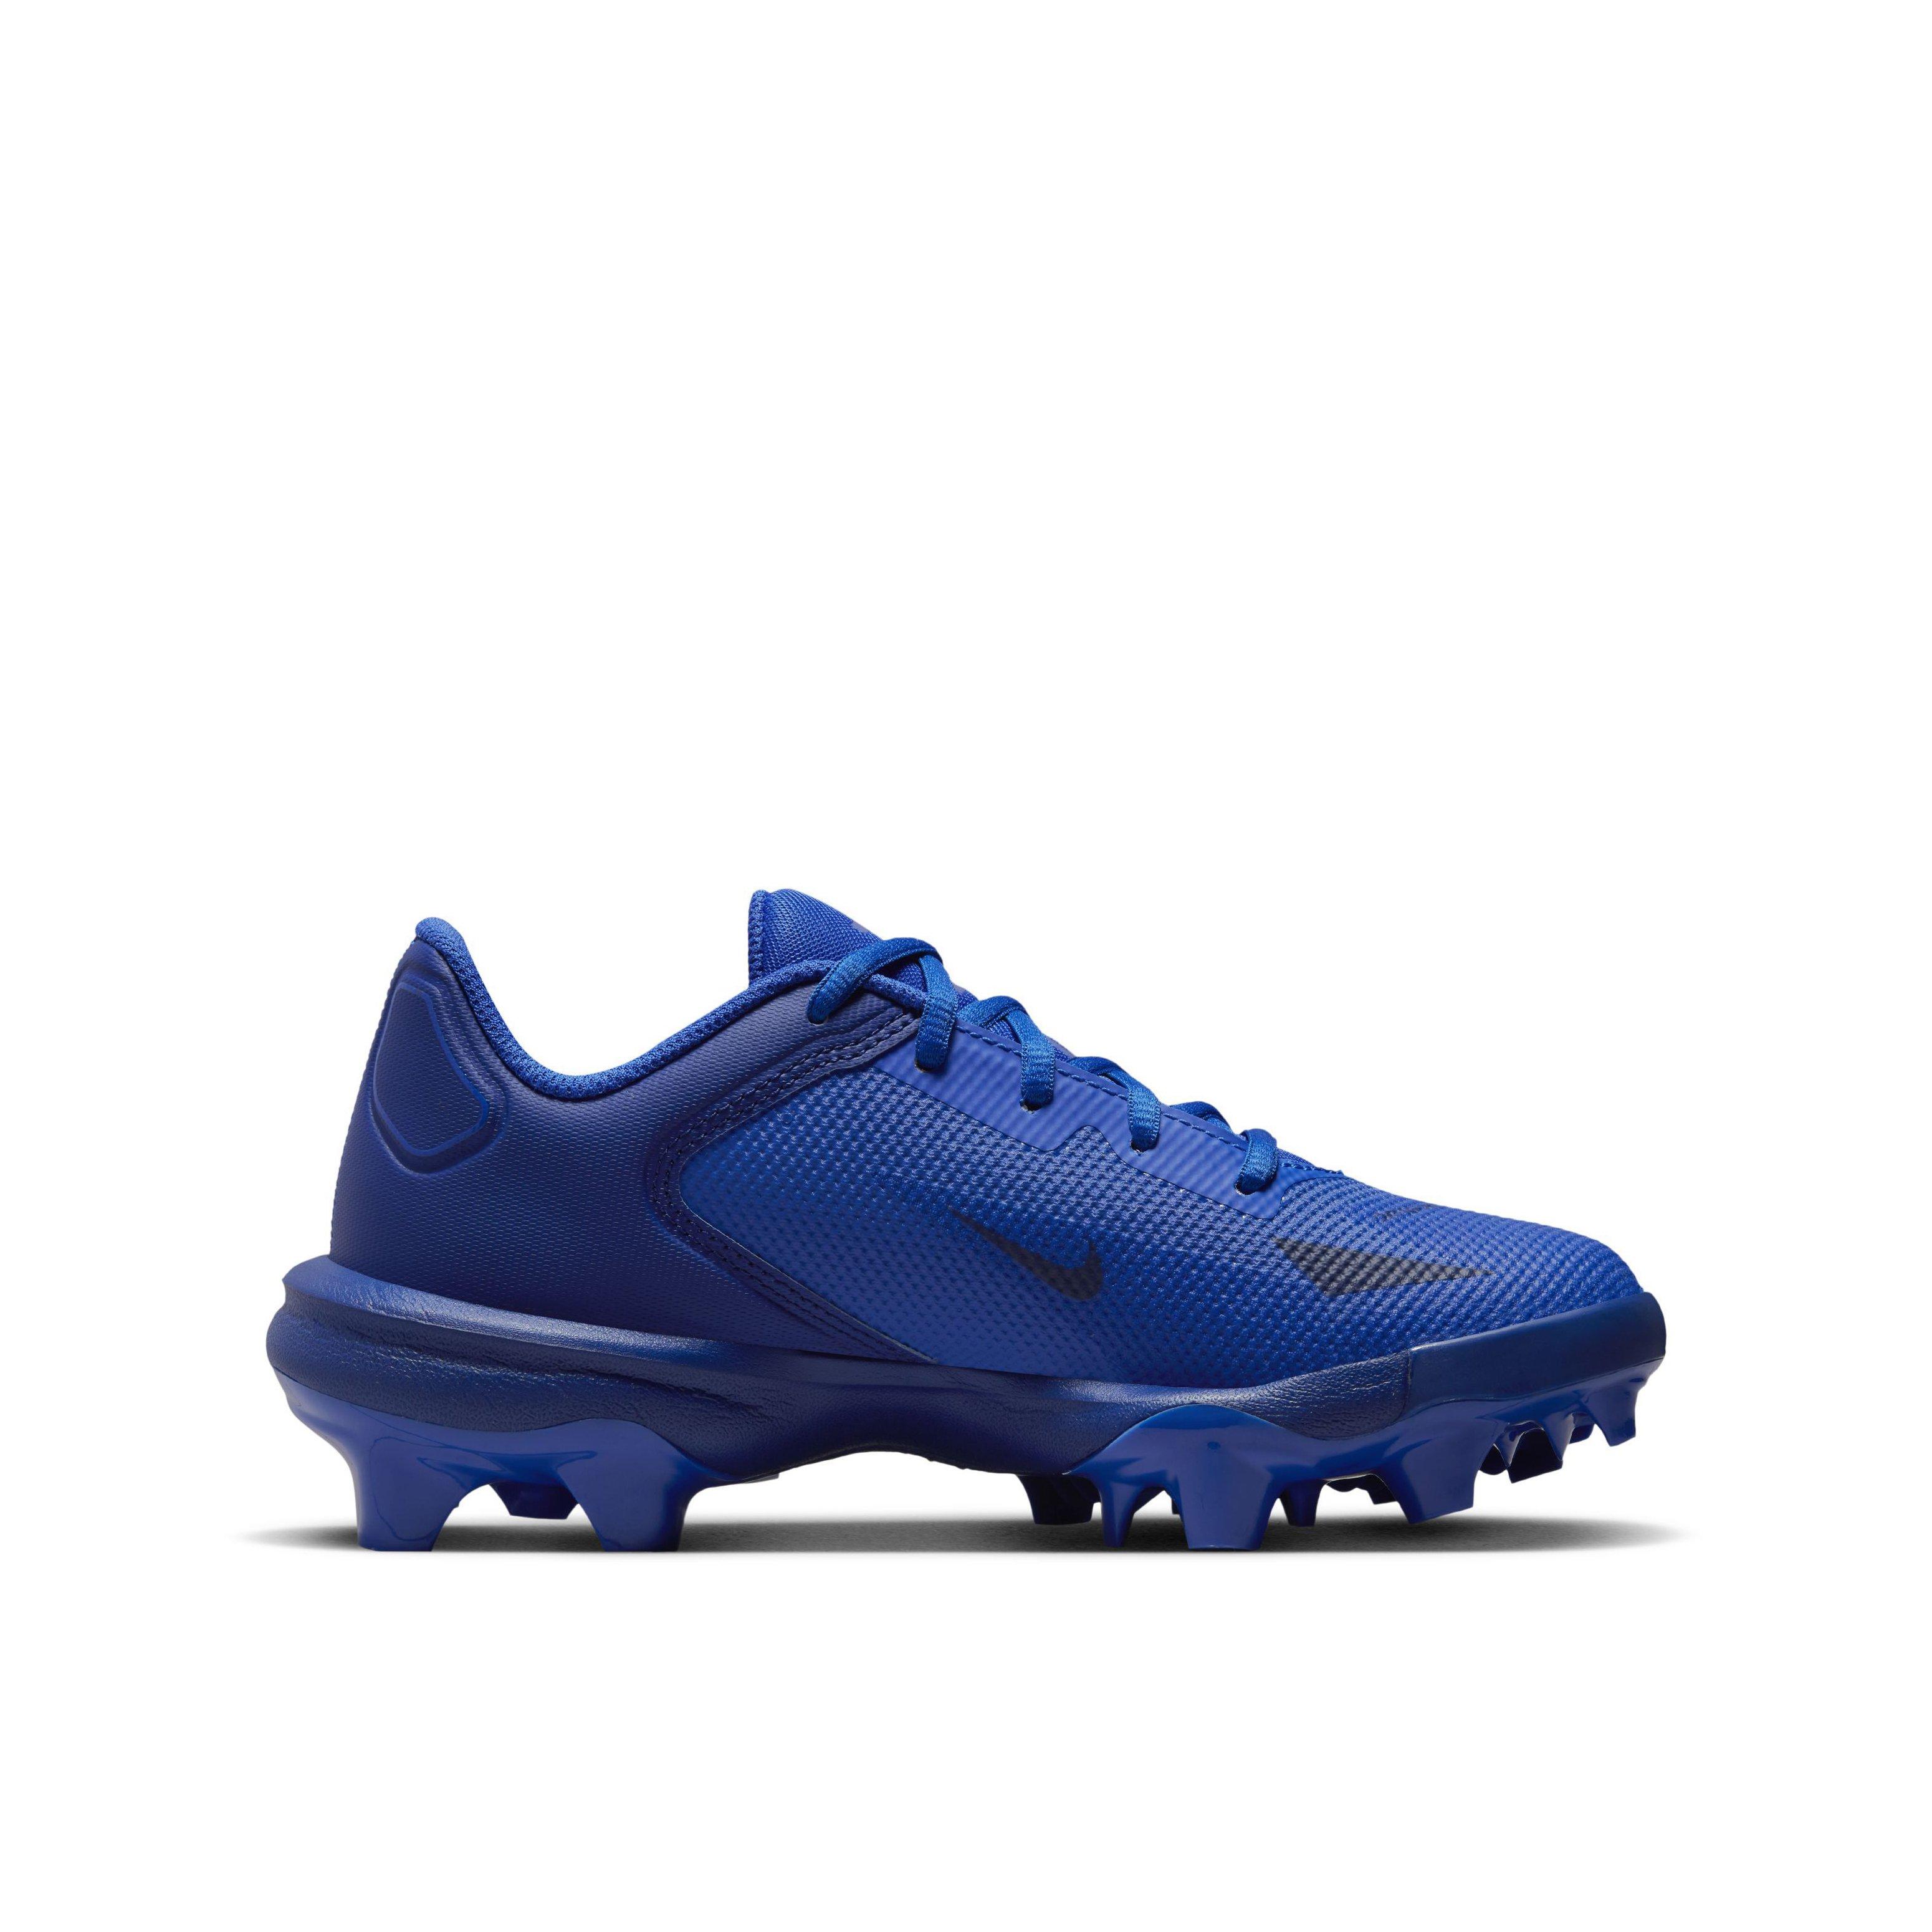 Royal Blue & White Dunk Nike Force Zoom Trout 7 Pro Cleats 15